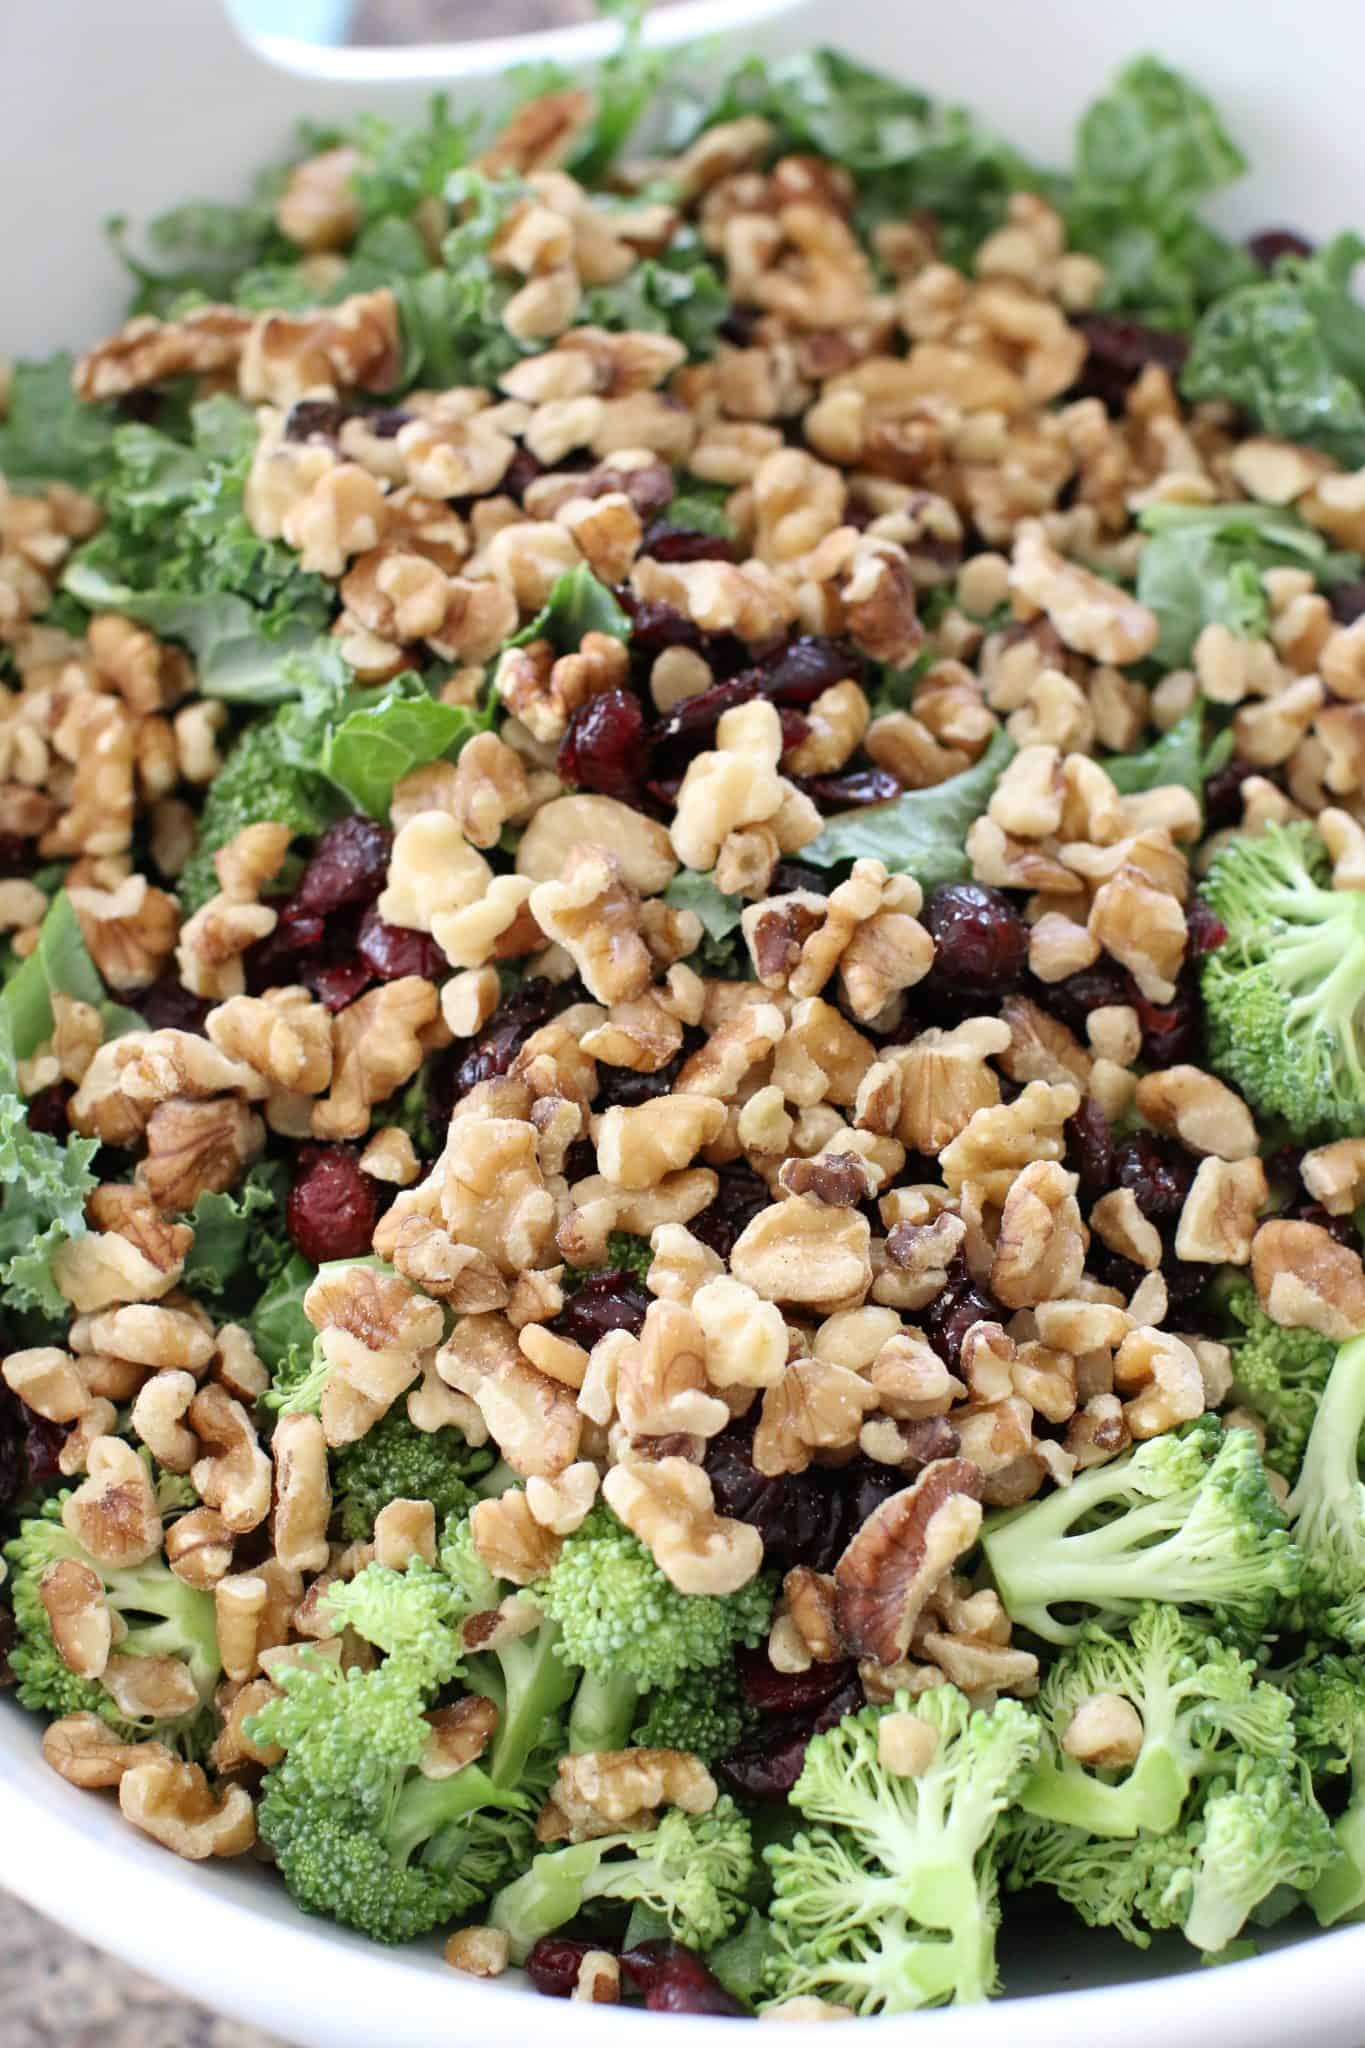 walnuts nad cranberries added on top of kale and broccoli in large white bowl.